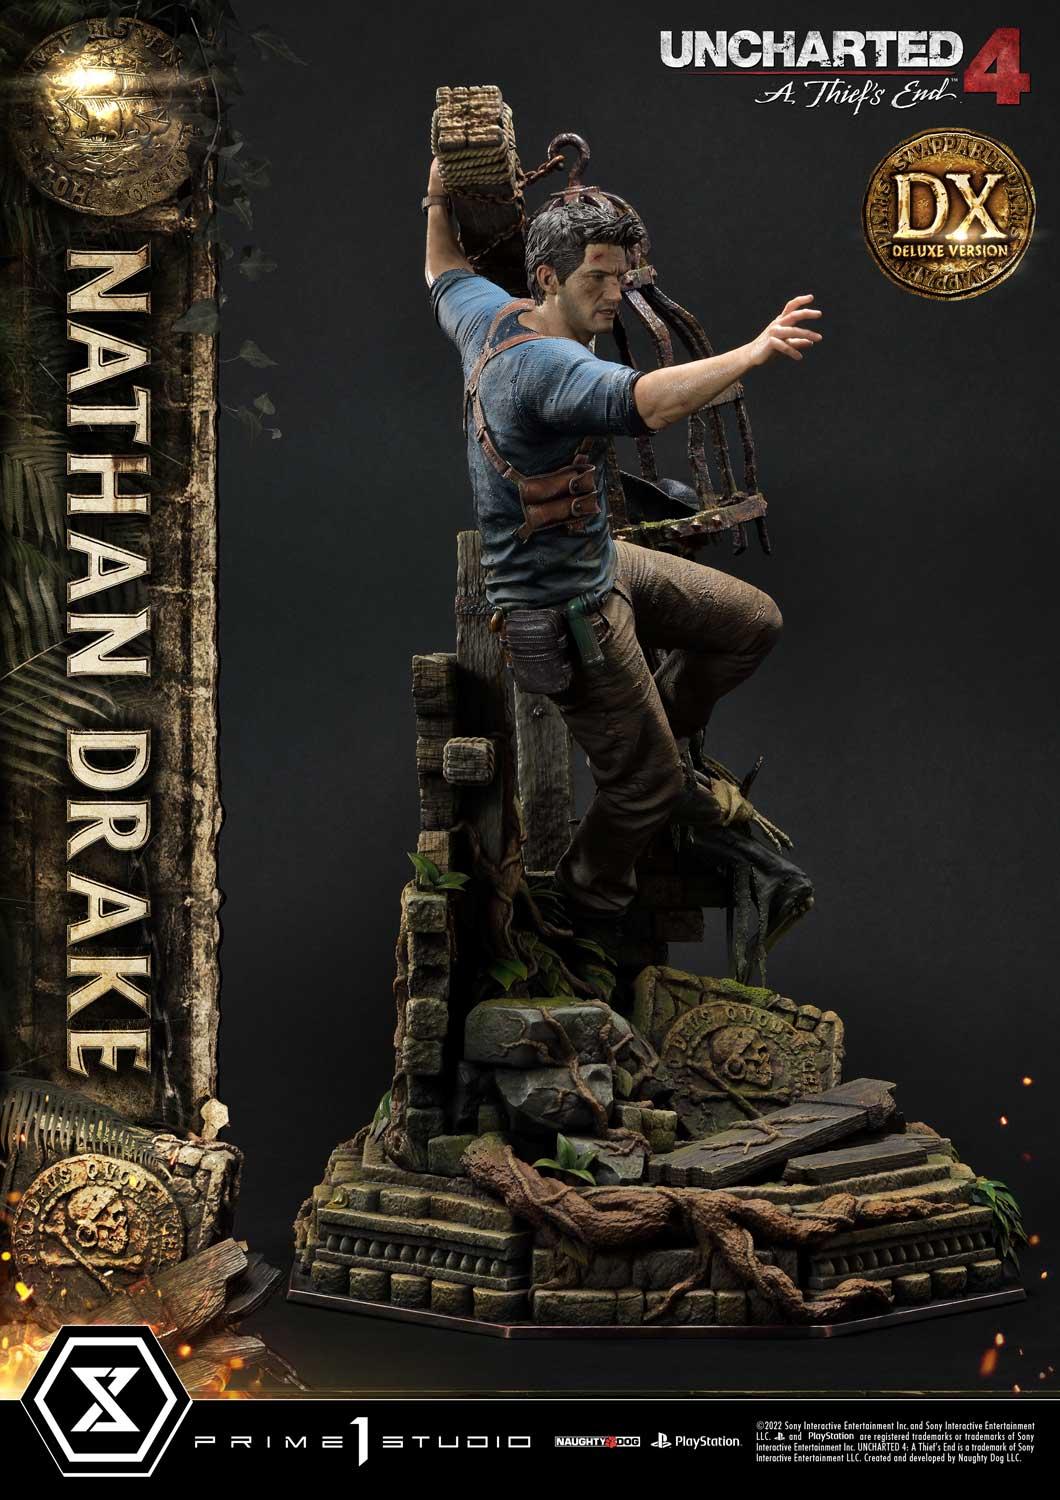 Nathan Drake (Uncharted) Movie Ver. Action Figure – Collector's Outpost